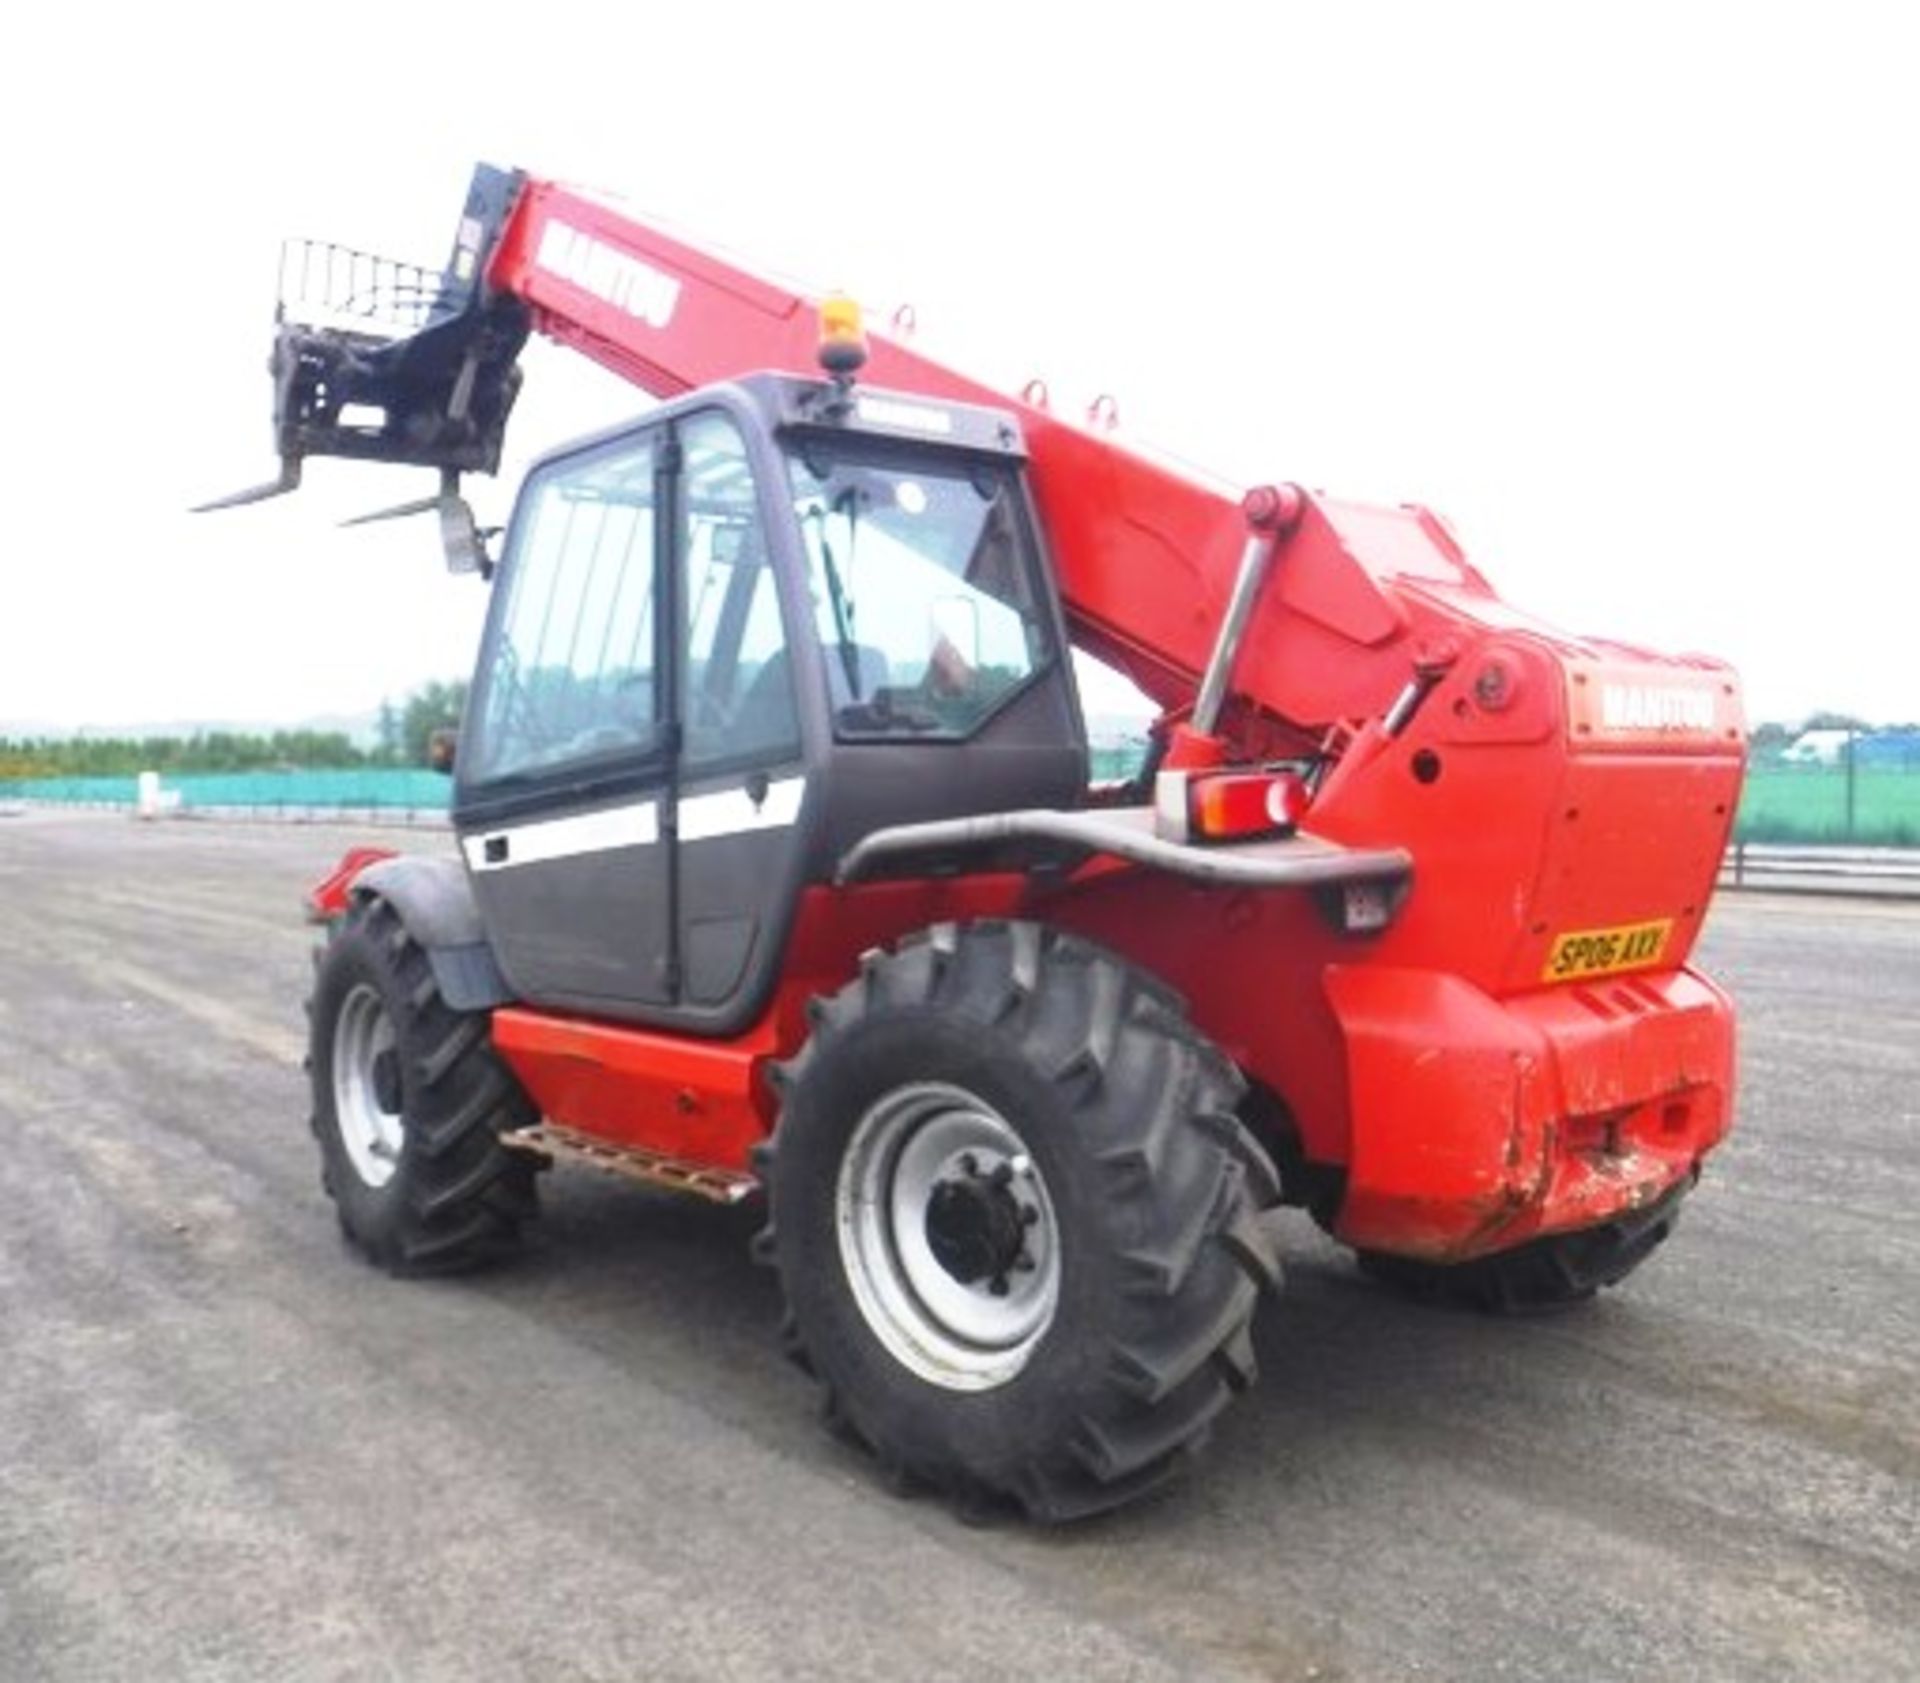 2006 MANITOU 14/35 TELEHANDLER c/w bucket & forks s/n 1230044. Reg no SP06 AXX. 2646HRS. - Image 11 of 16